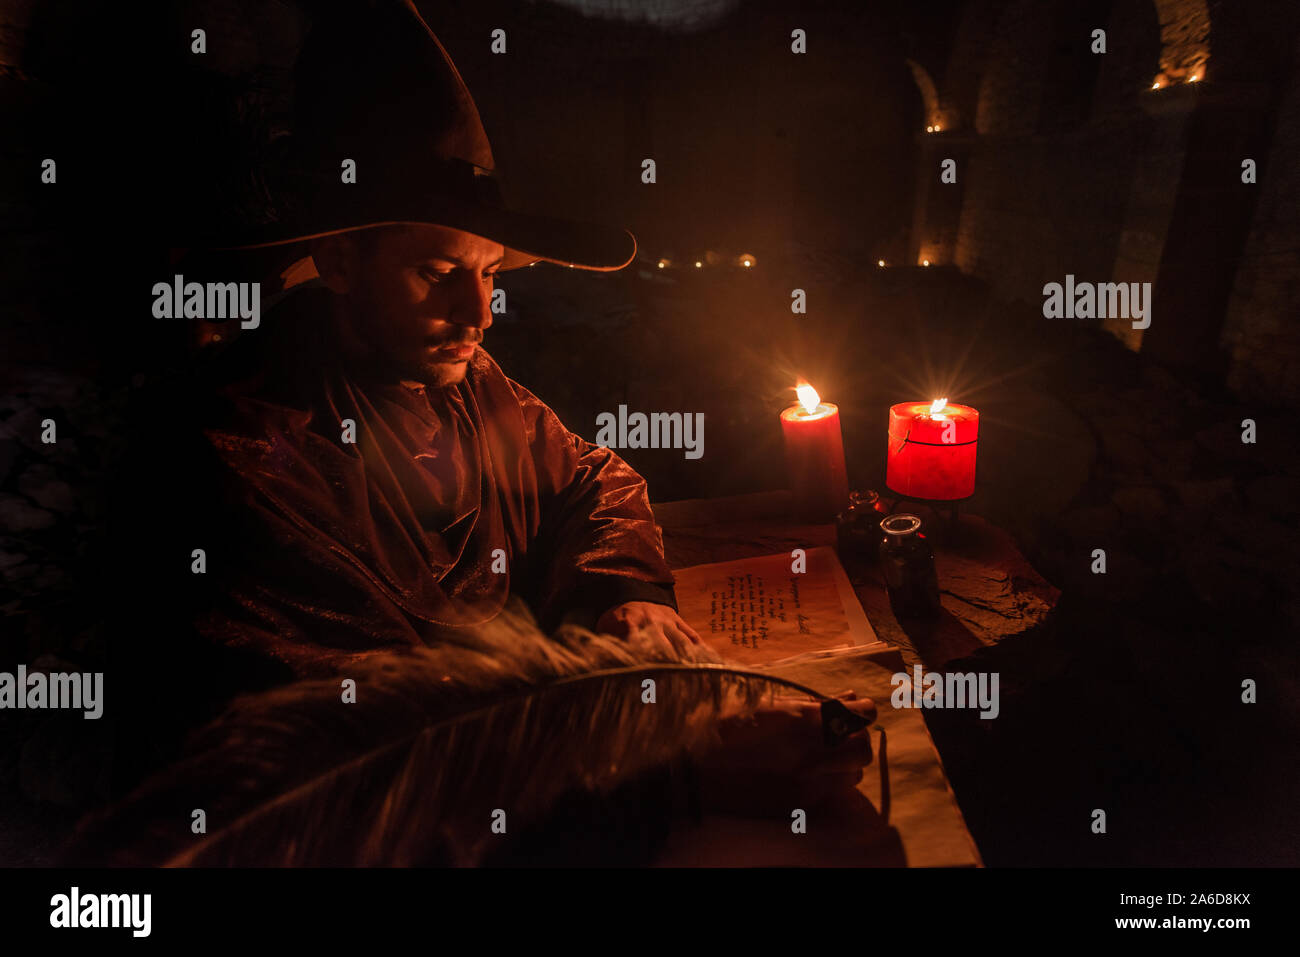 Young prophet Nostradamus writing his prophesies on a paper sitting in a ruined old church at night Stock Photo